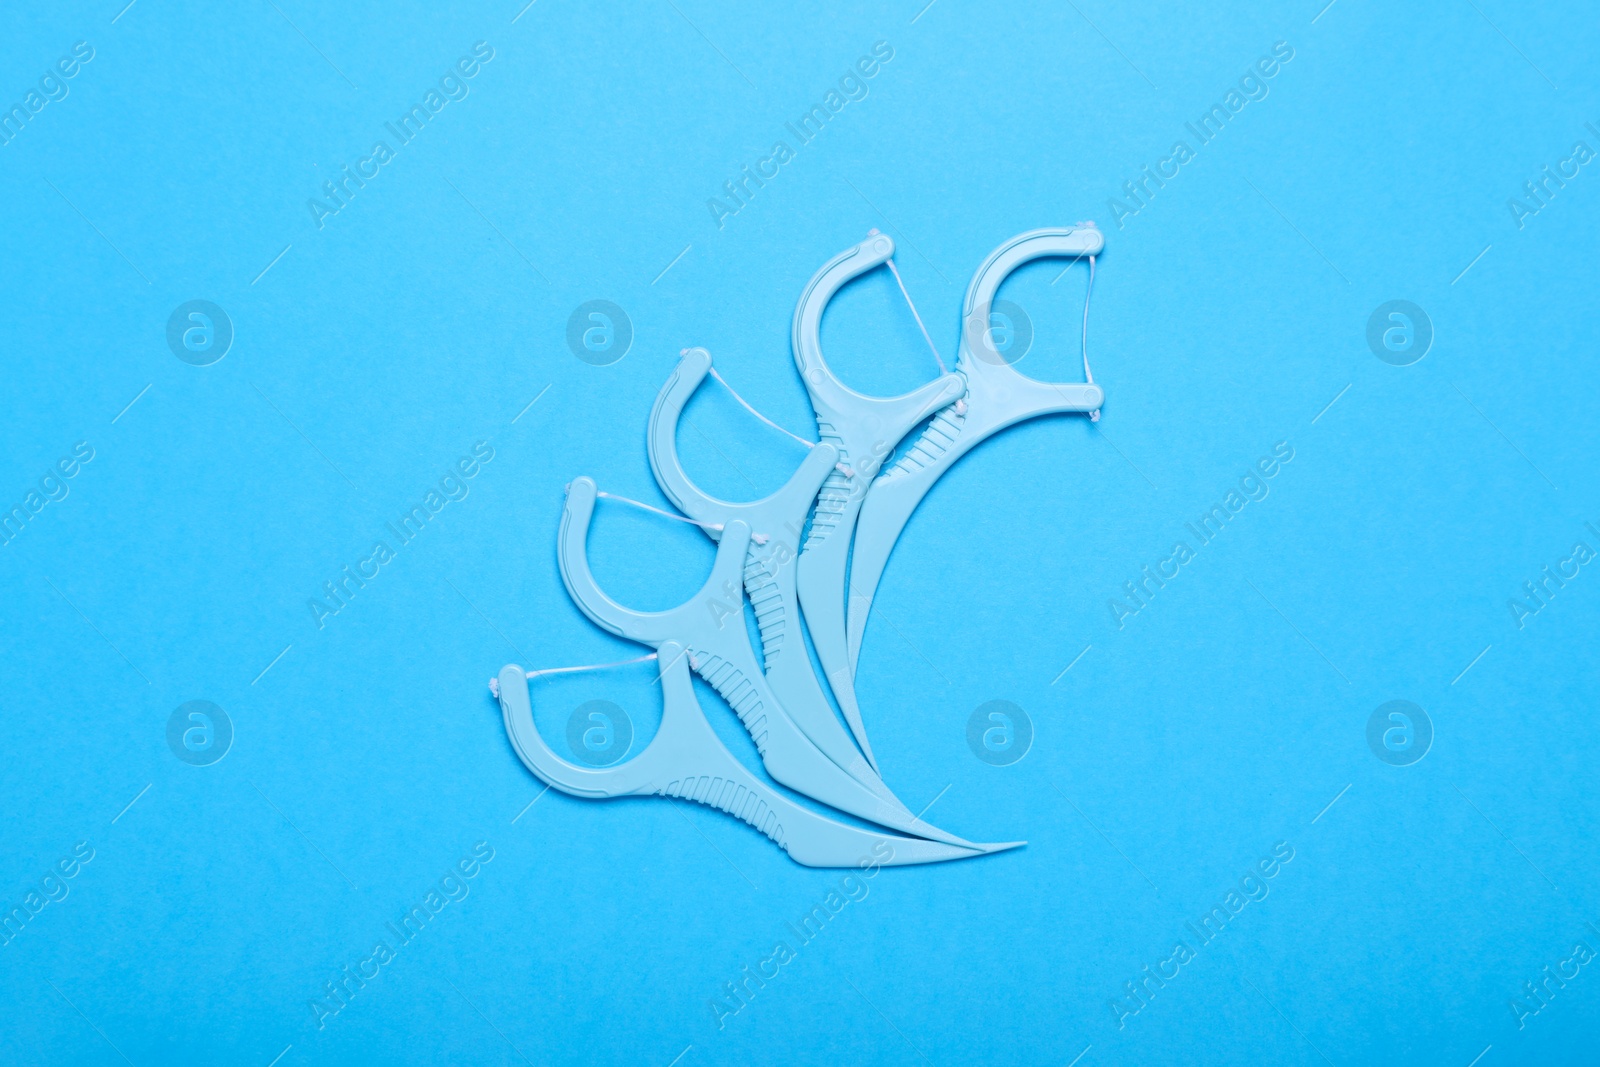 Photo of Dental flossers on light blue background, flat lay